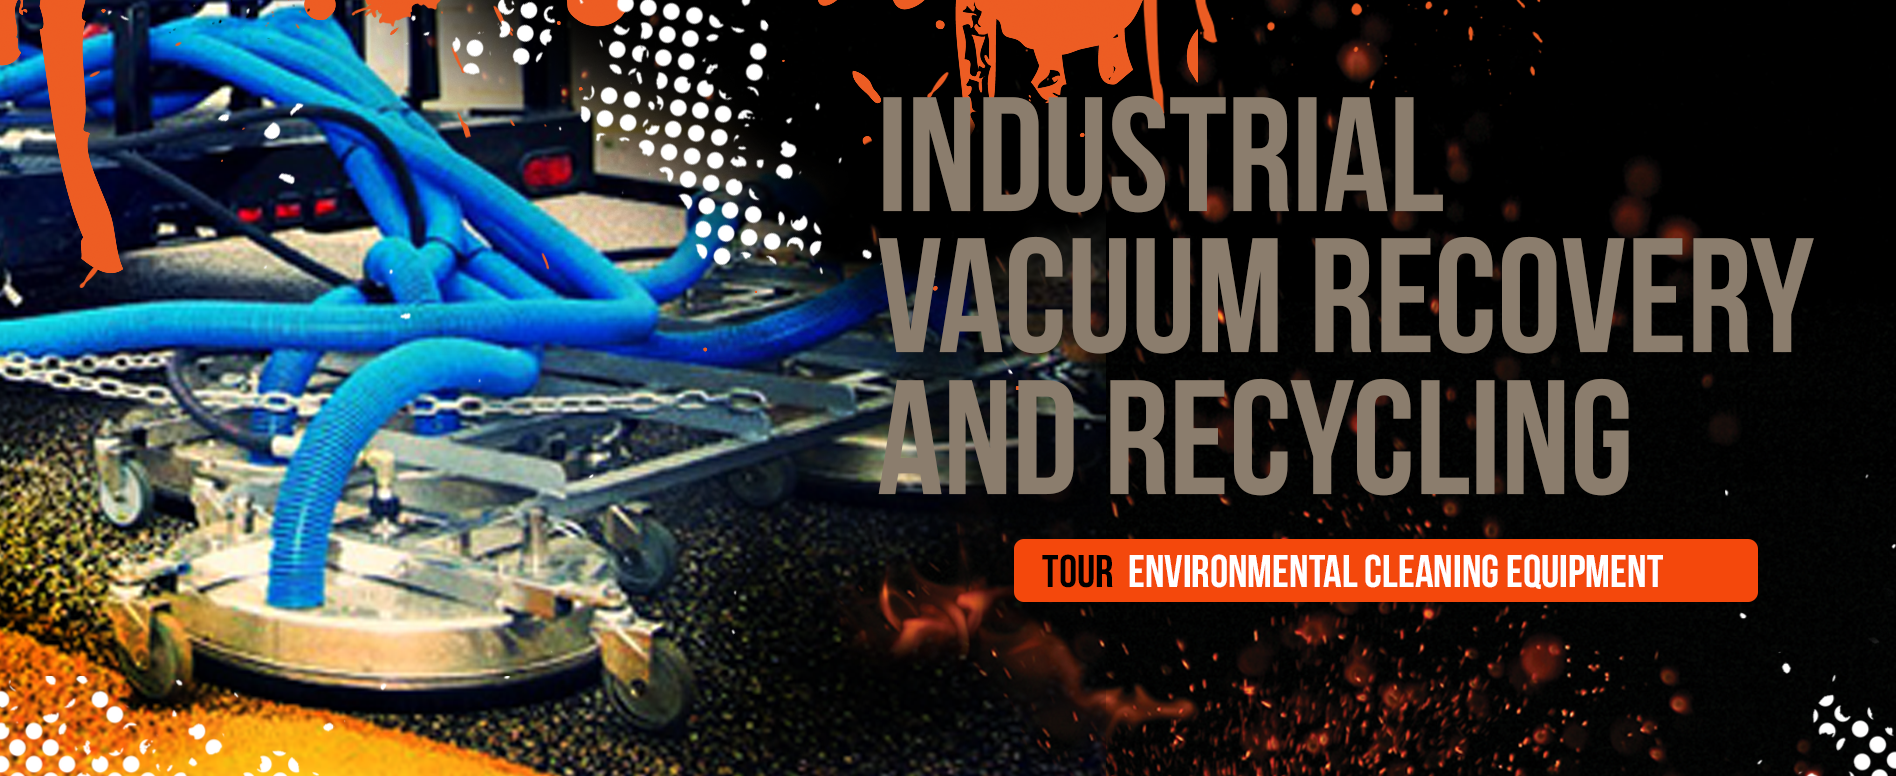 Pressure Washer Vacuum Recovery And Recycling Equipment